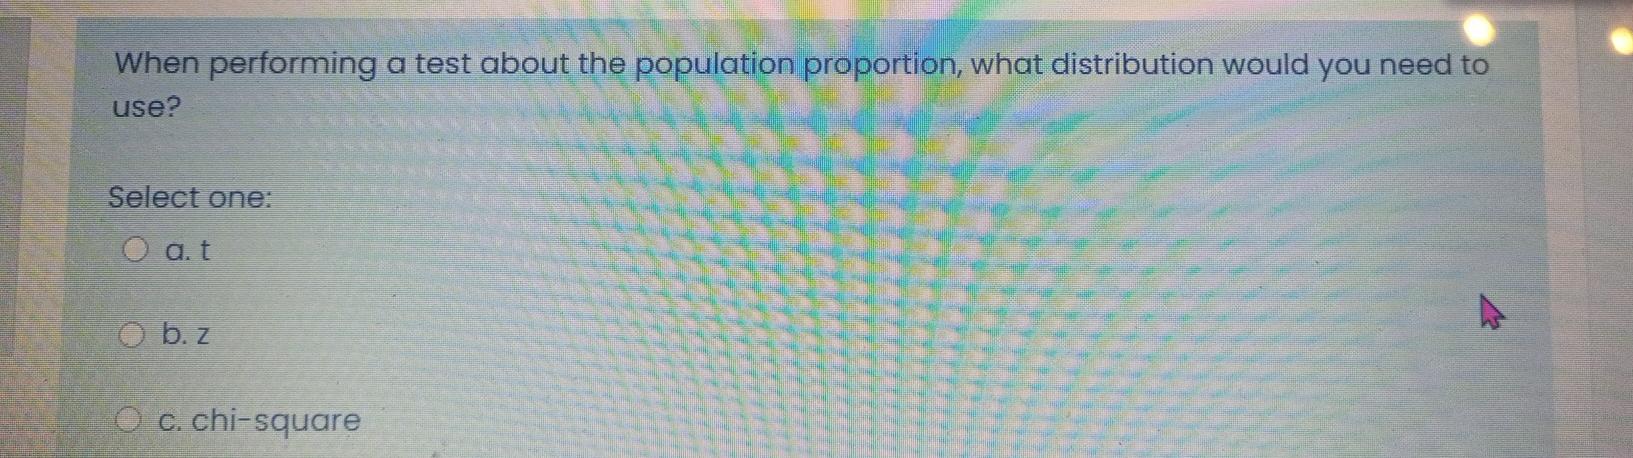 When Performing A Test About The Population Proportion What Distribution Would You Need To Use Select One O At O B Z 1